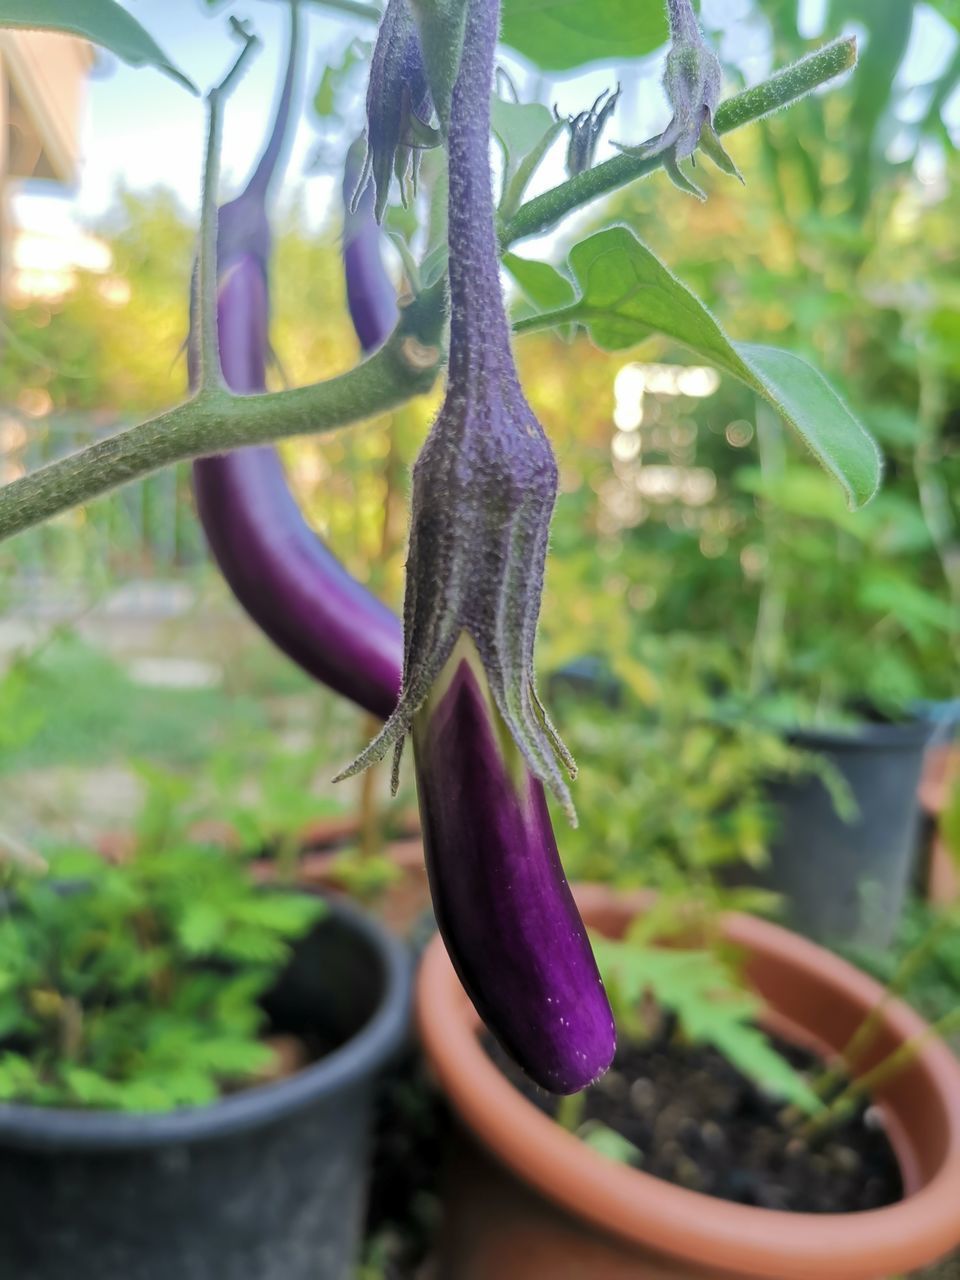 CLOSE-UP OF PURPLE POTTED PLANT HANGING ON POT